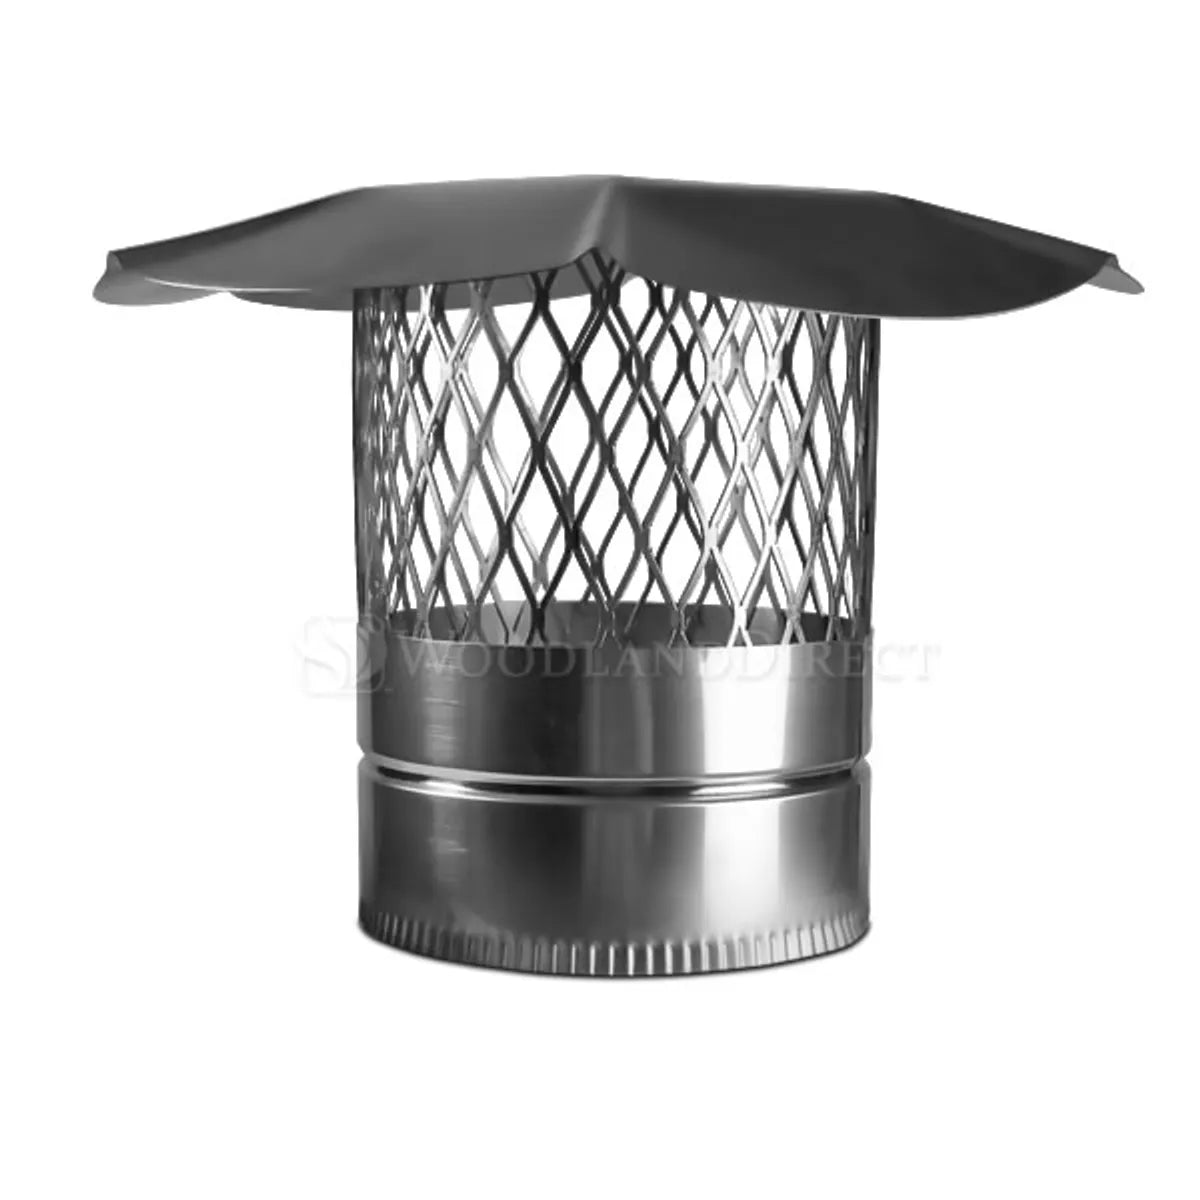 Champion 7" Chimney Liner Cap with Screen